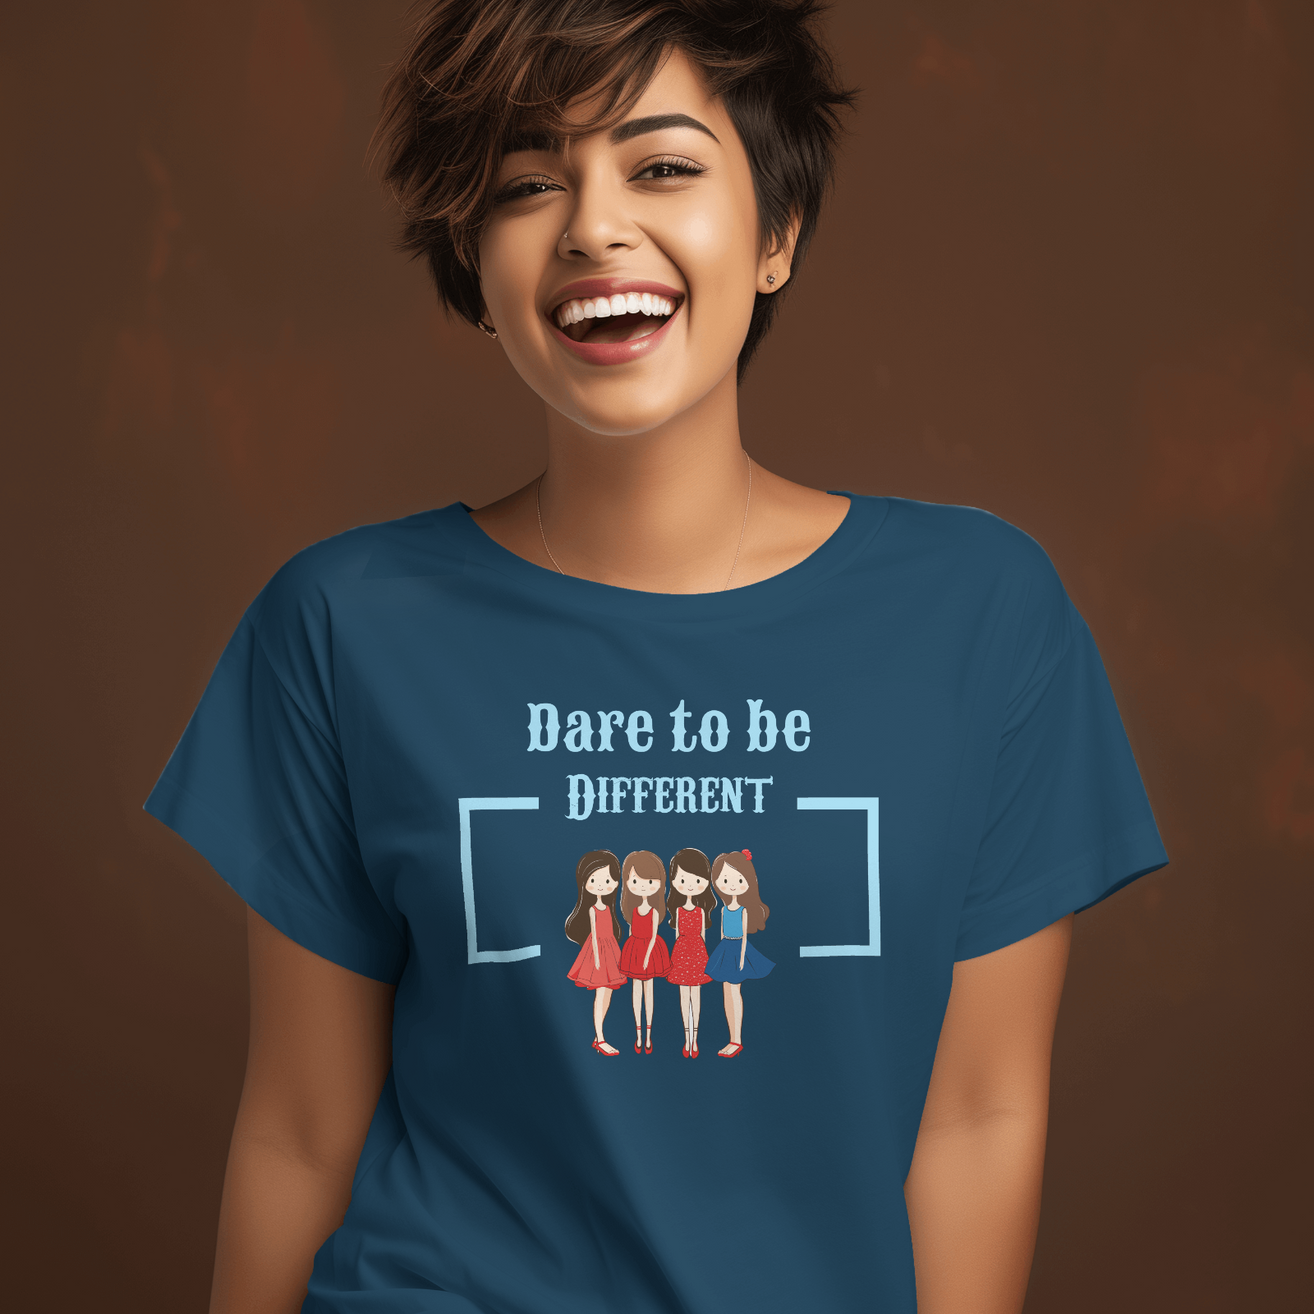 Dare to be Different Women's T-Shirt - Unique Empowerment Tee